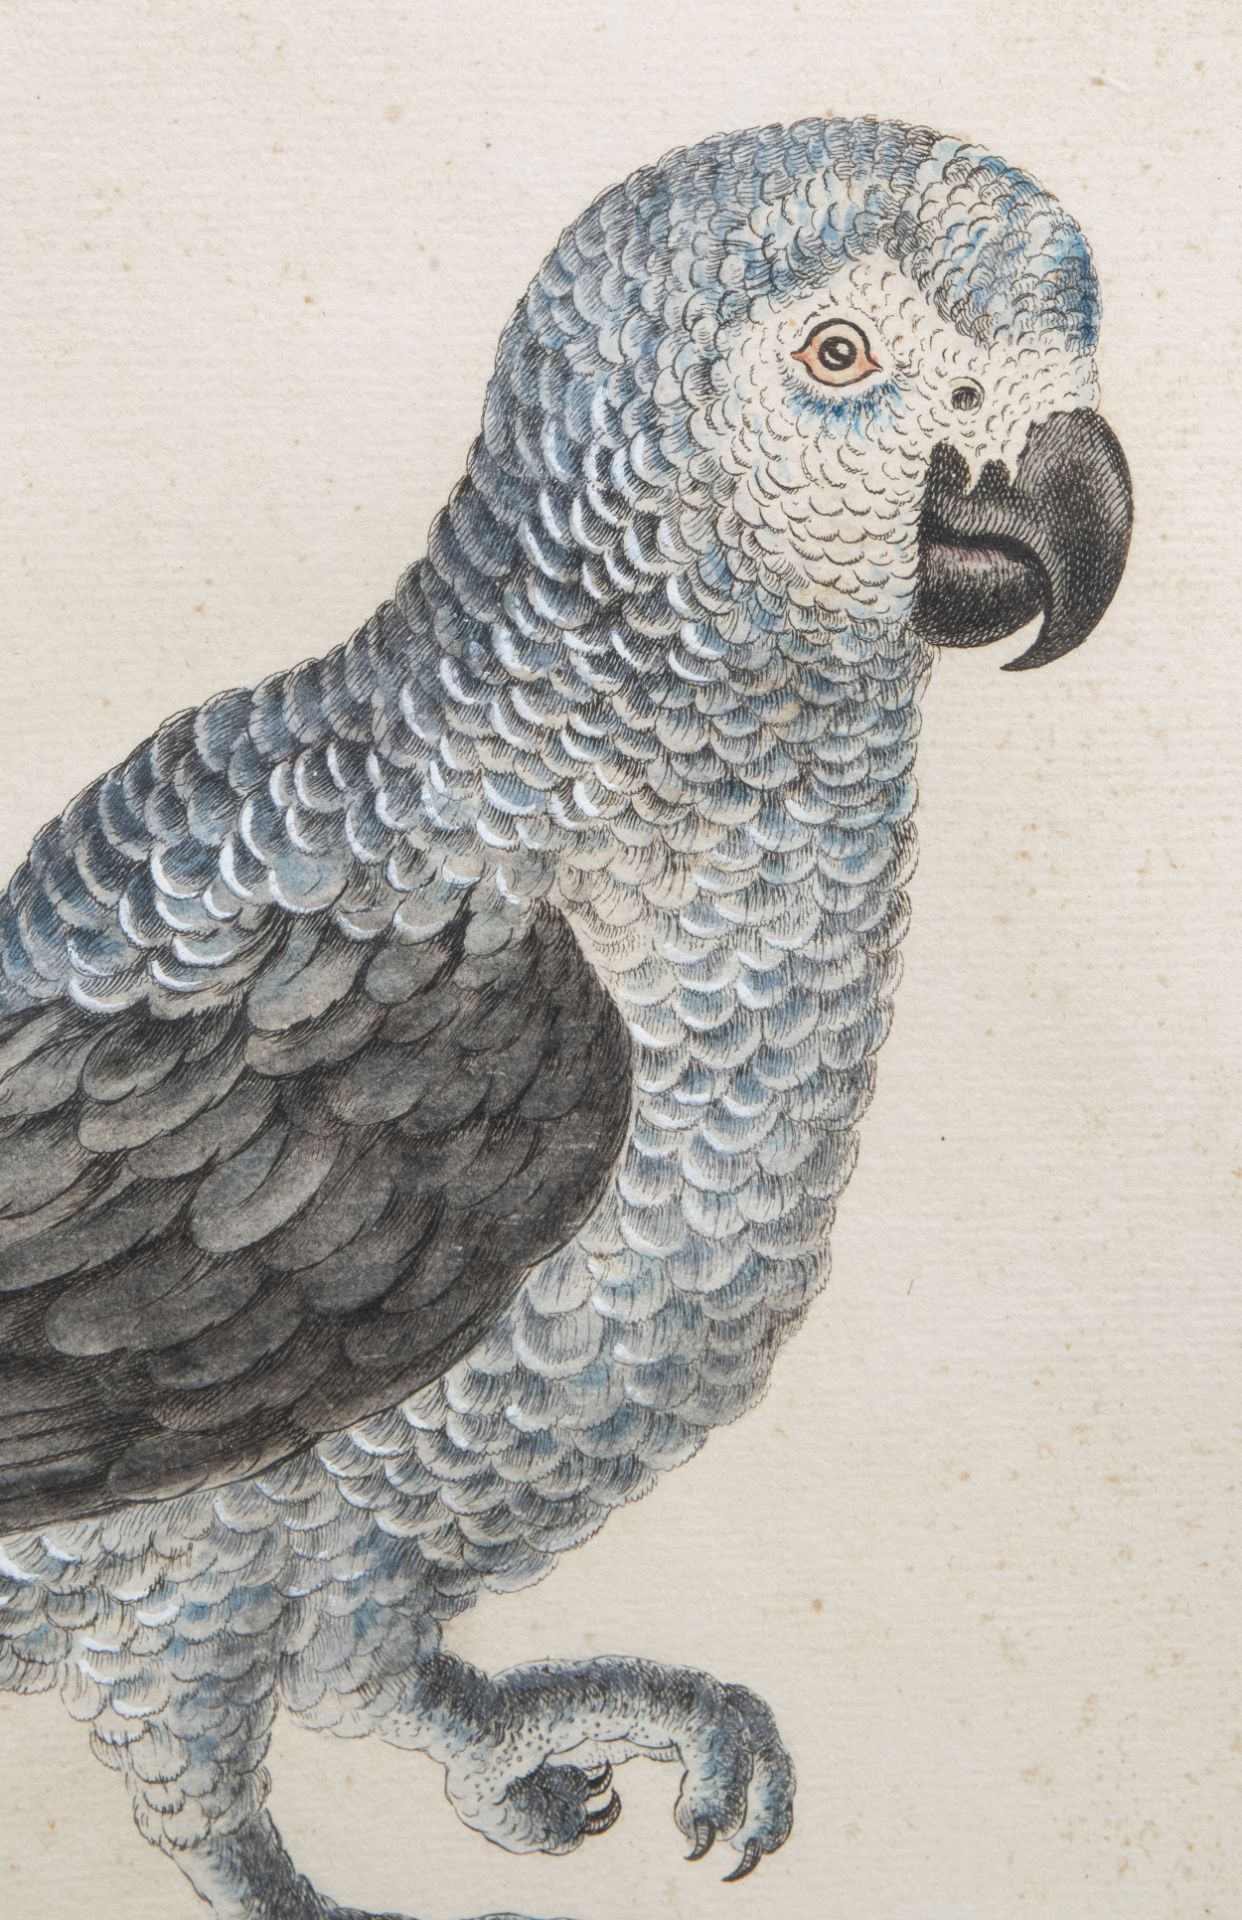 Xaverio Manetti (1723-1785): Two parrots, hand-coloured engravings, 18th C. - Image 5 of 10